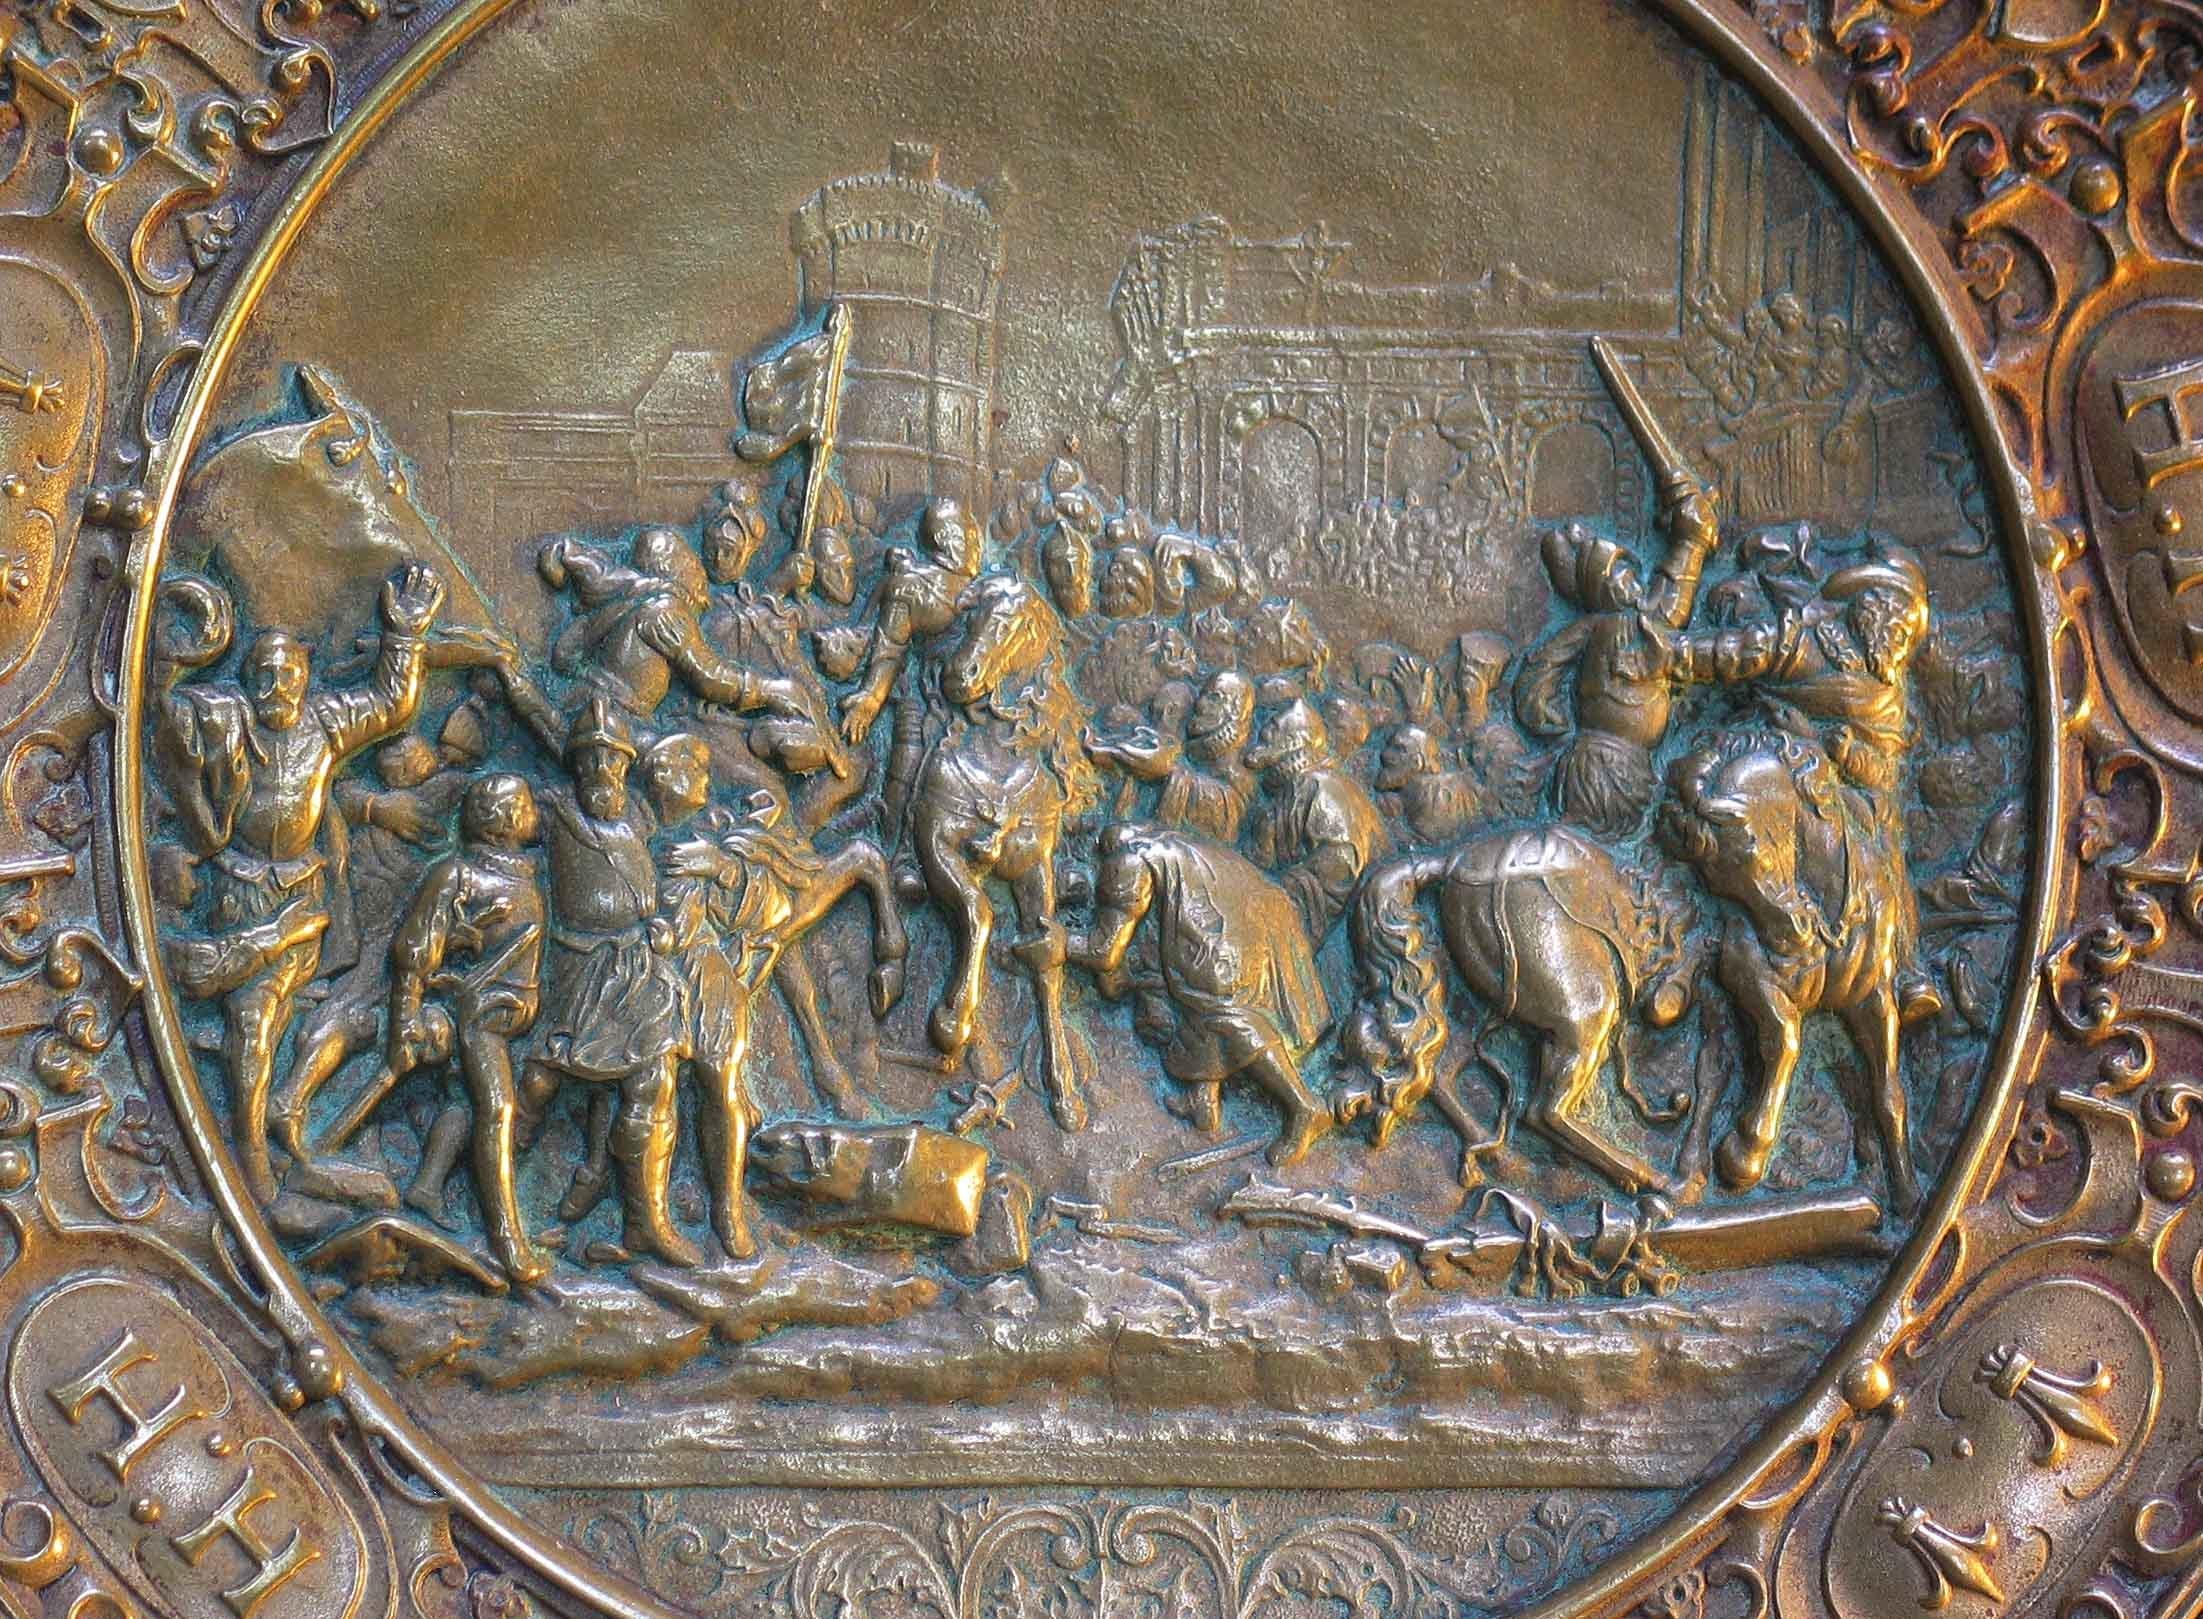 Renaissance German Bronze Historicism Charger Depicting Entry of Henry IV into Paris in 1594 For Sale